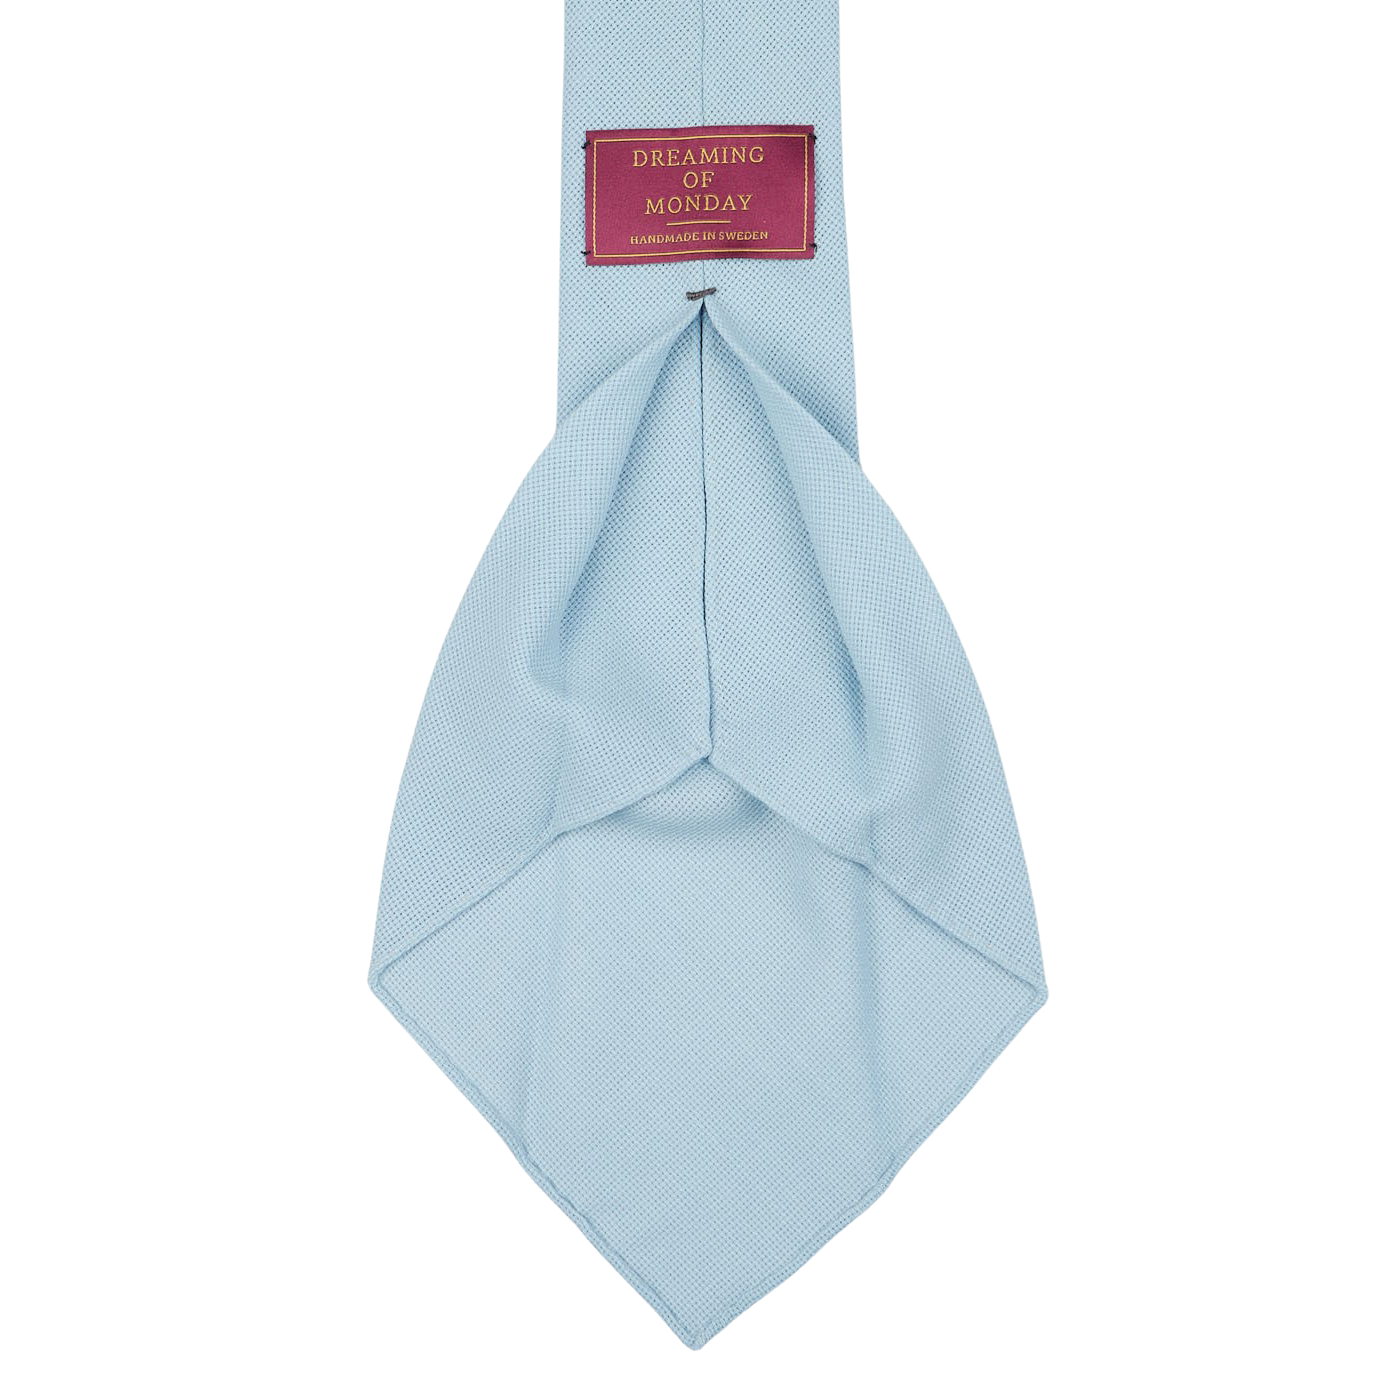 A Sky Blue 7-Fold Wool Hopsack Tie is shown, featuring a label that reads "Dreaming Of Monday" in a red rectangular box. The tie boasts an unlined 7-fold construction, ensuring both elegance and durability.